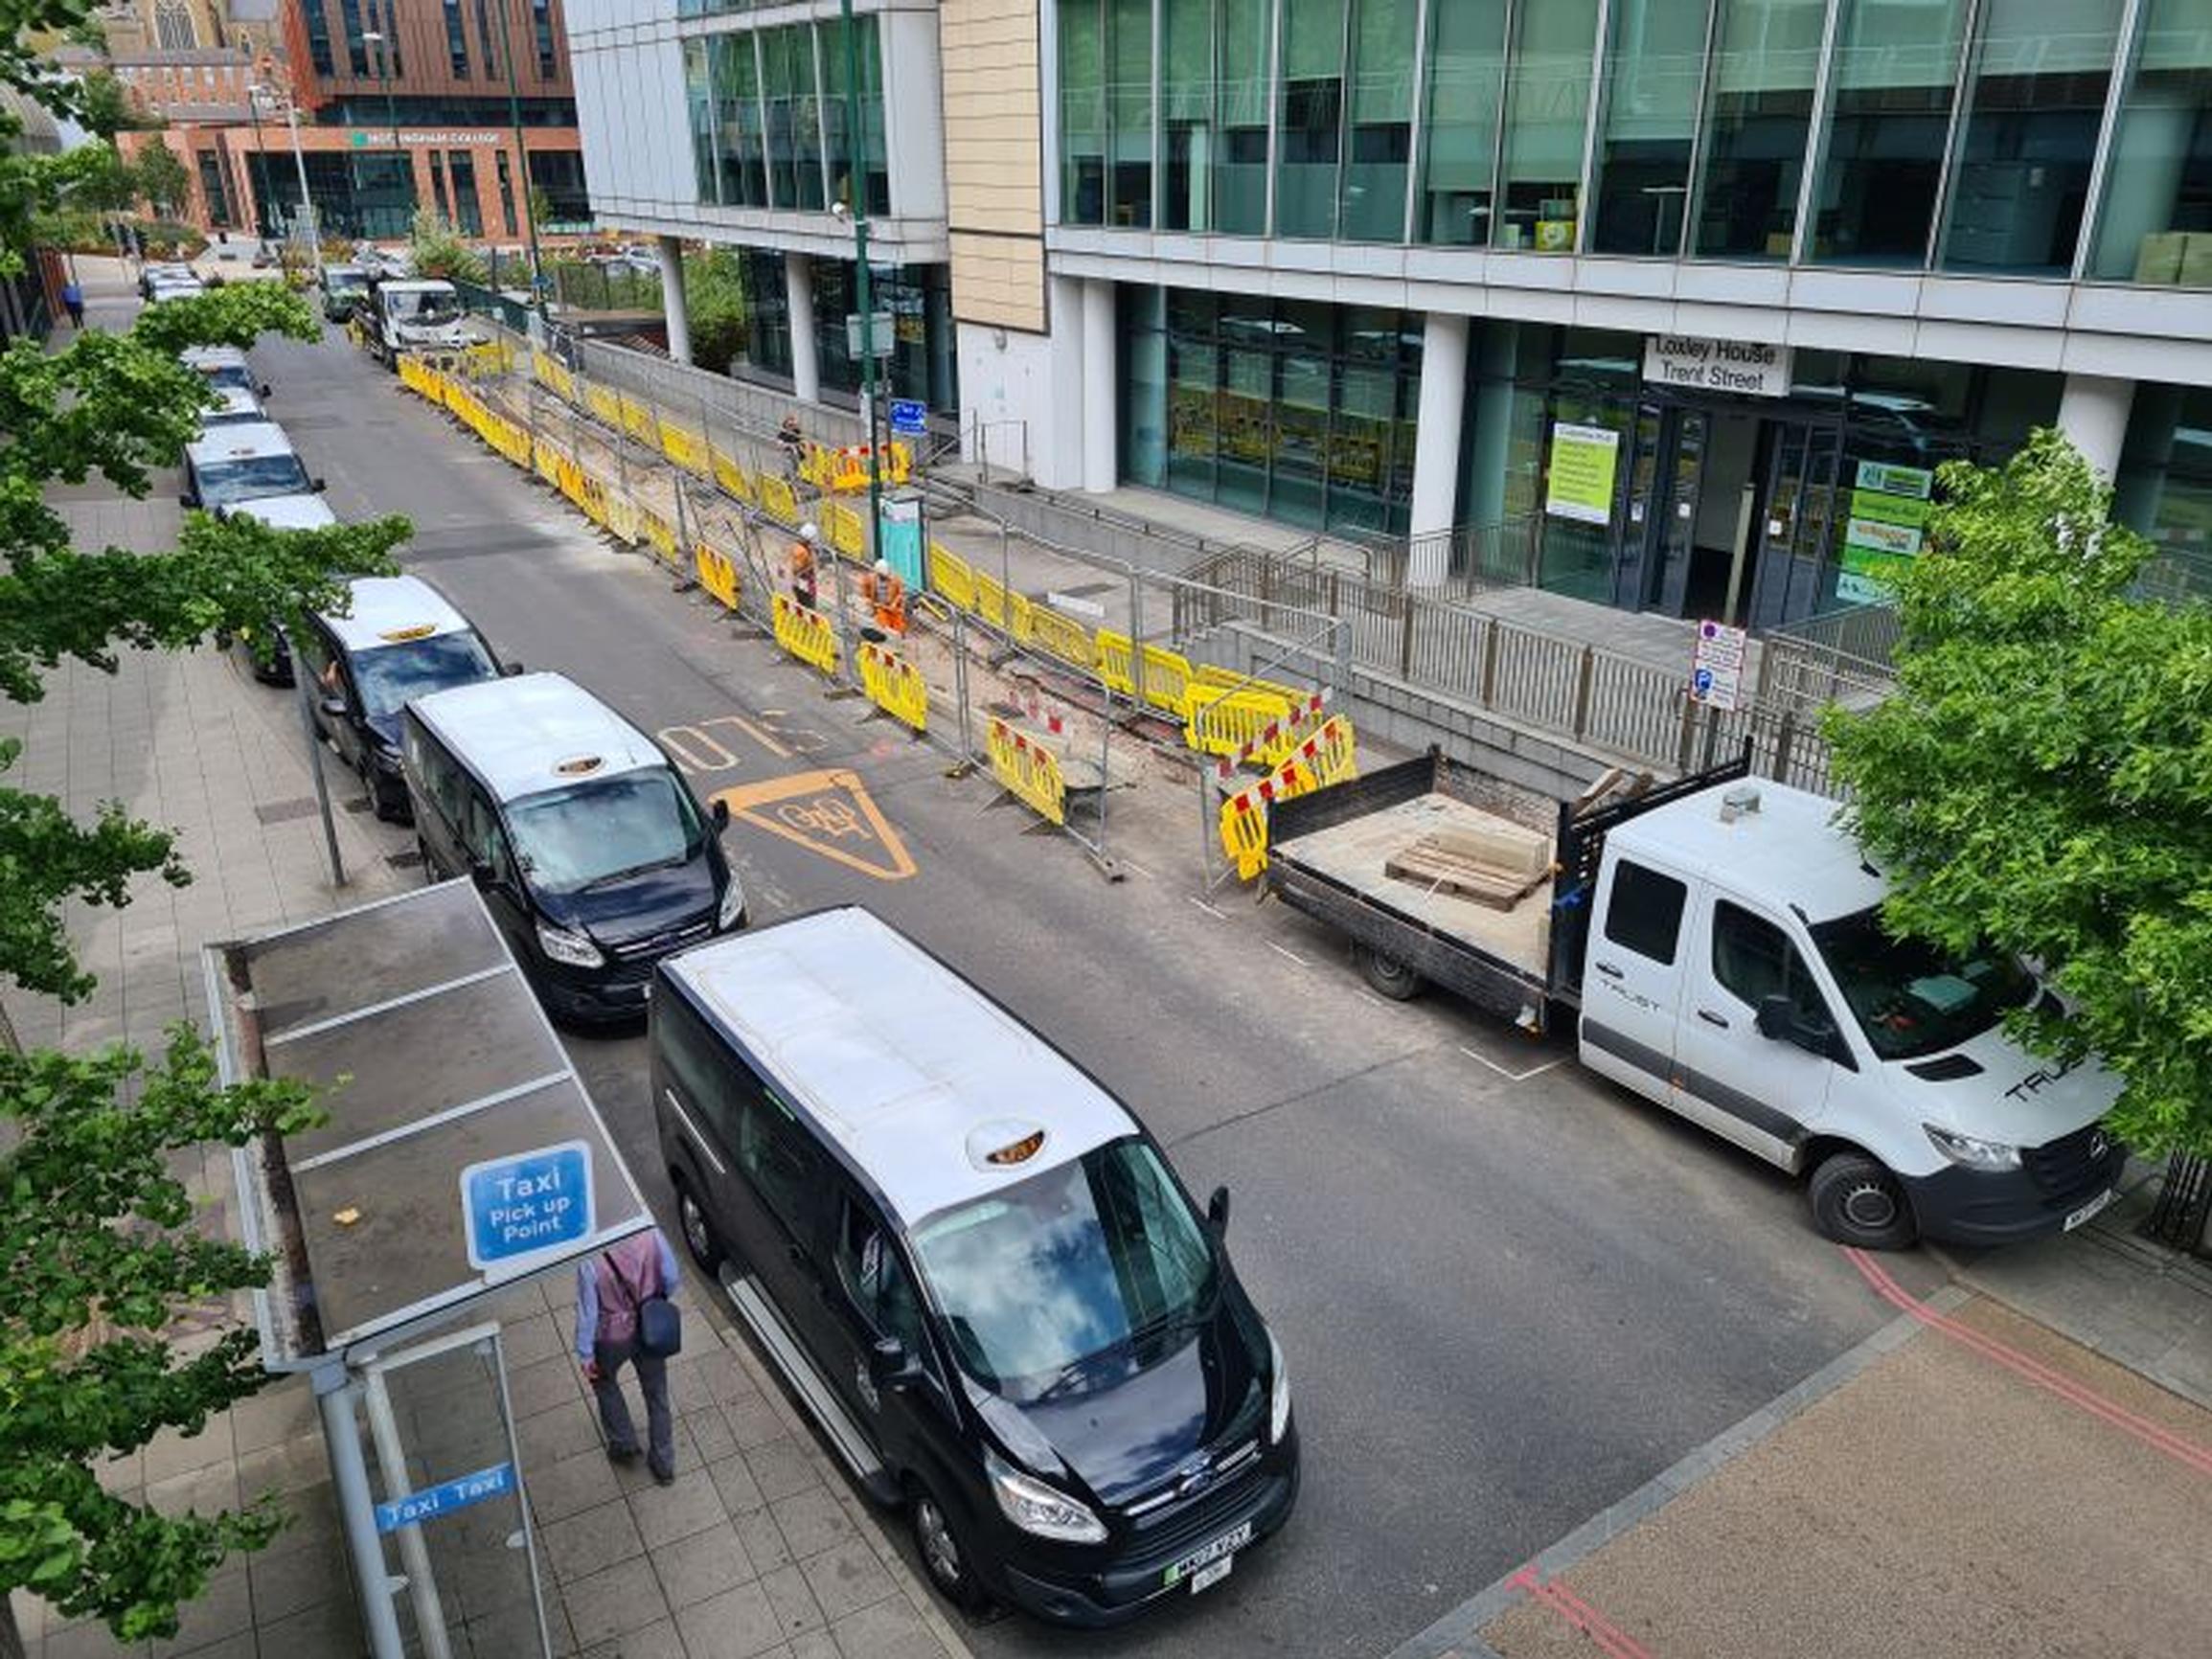 The Wireless Charging of Electric Taxis (WiCET)  trial area in Nottingham